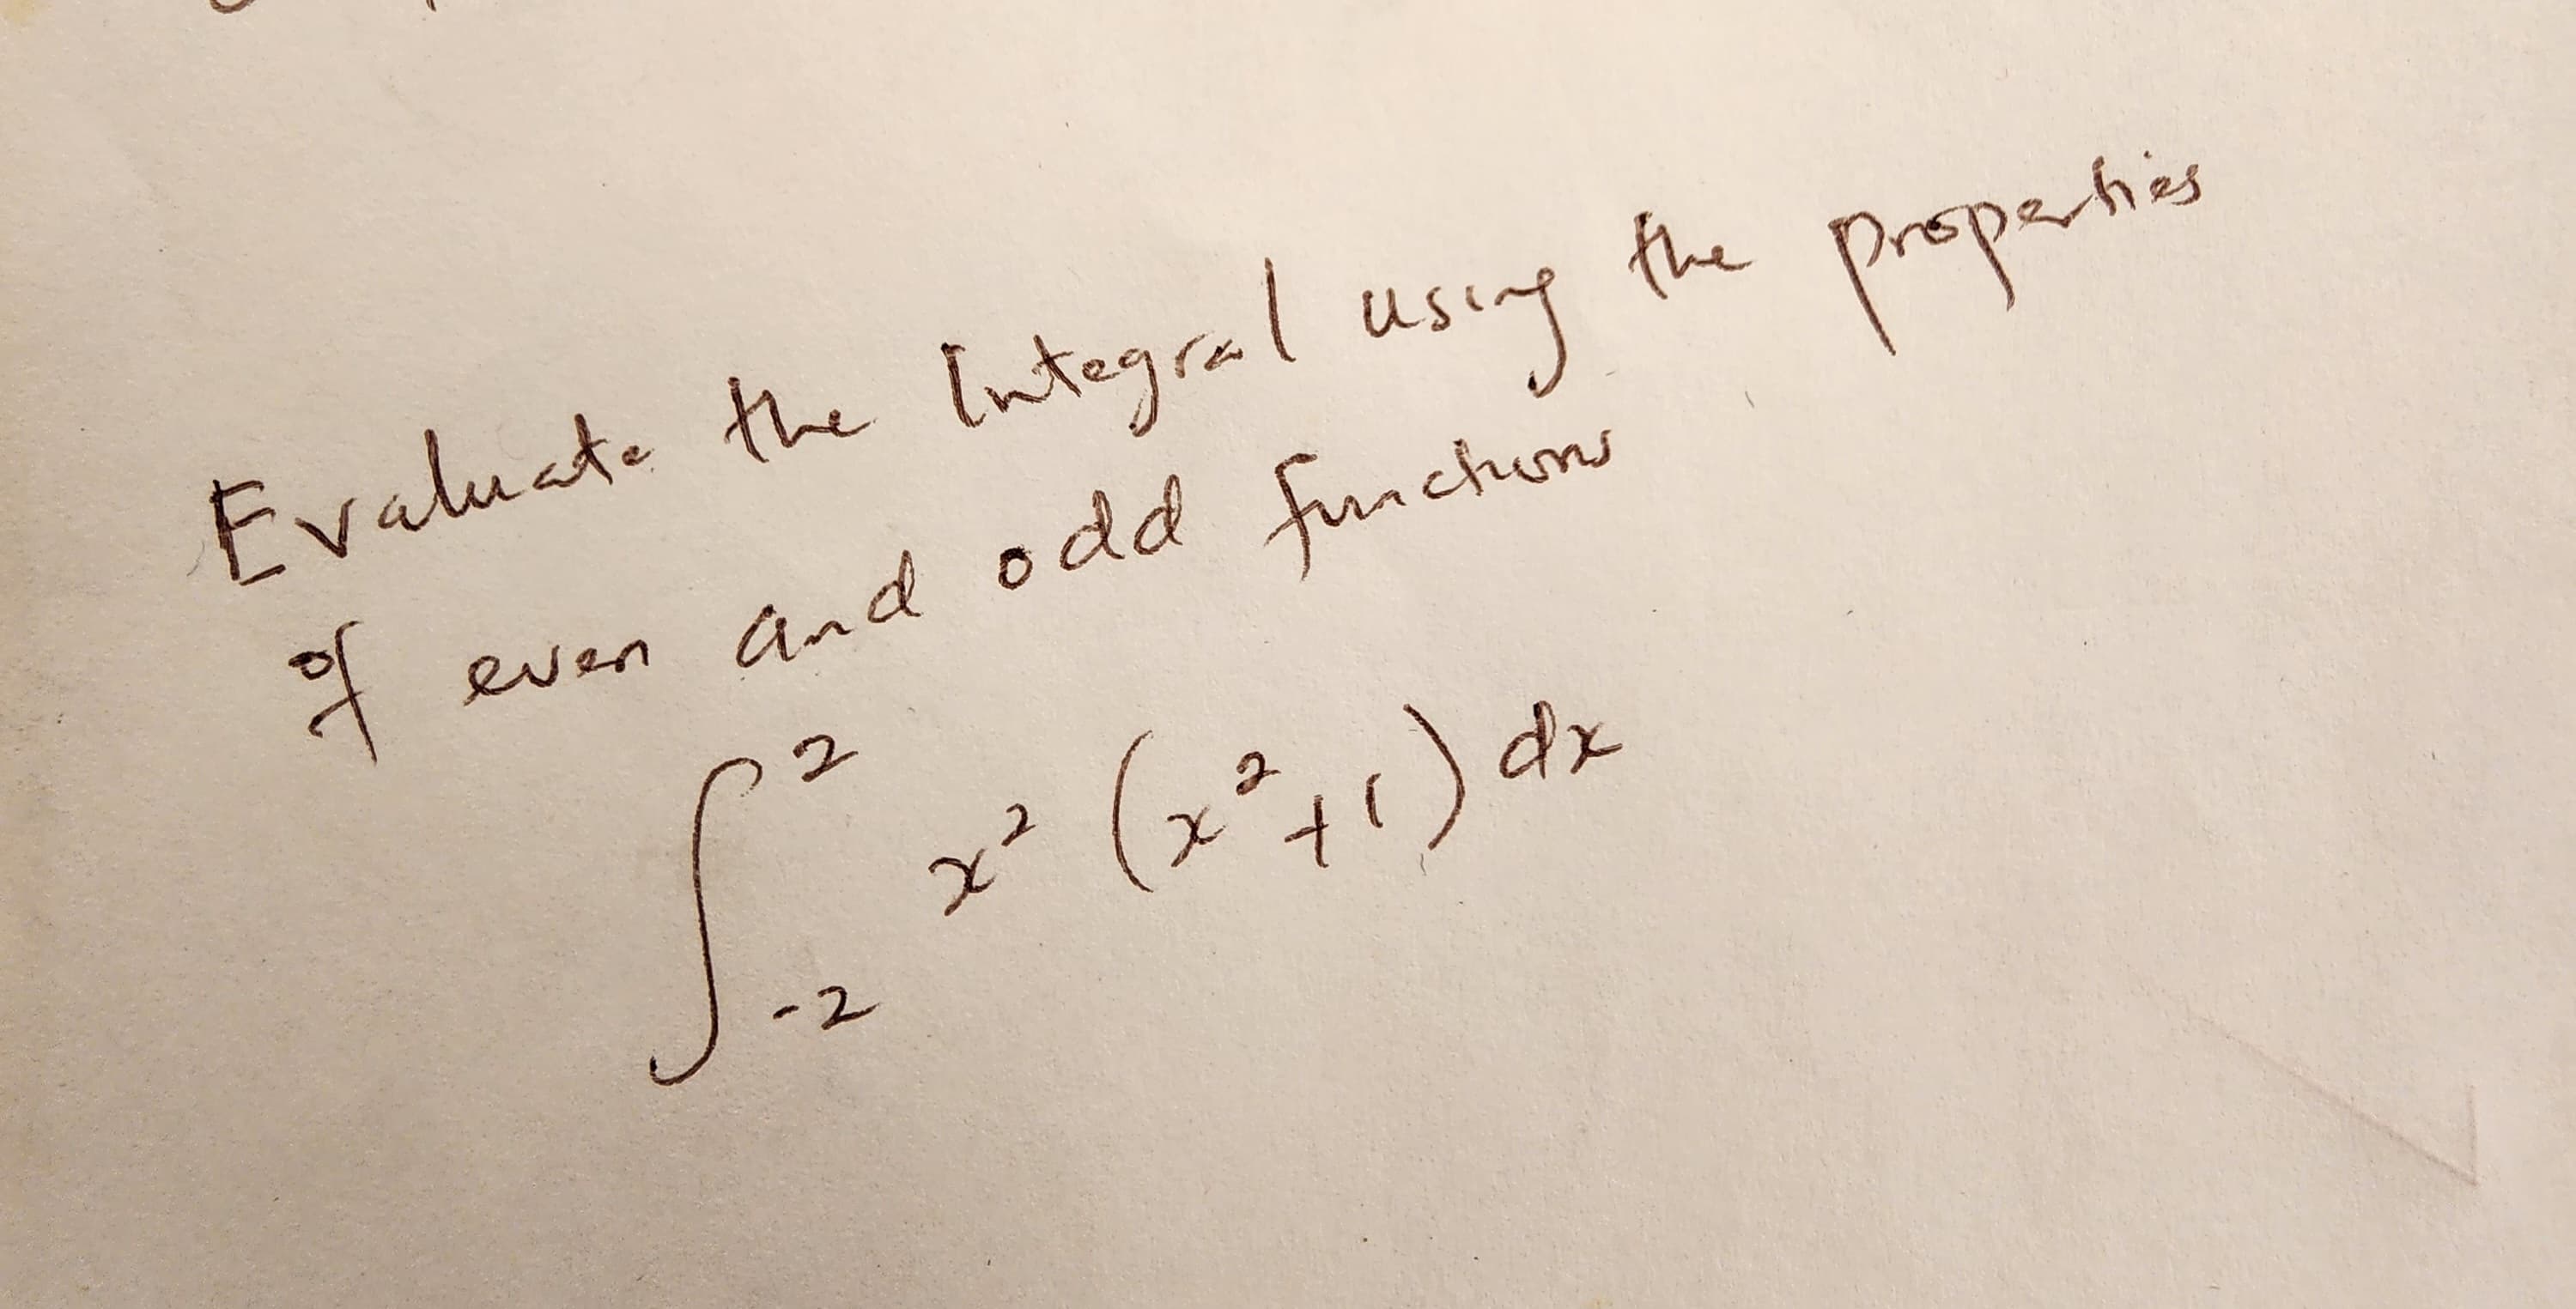 Evaluate the Integral using
of
even and odd functions
2
5.₂
-2
the
x² (x² +1) dx
properties